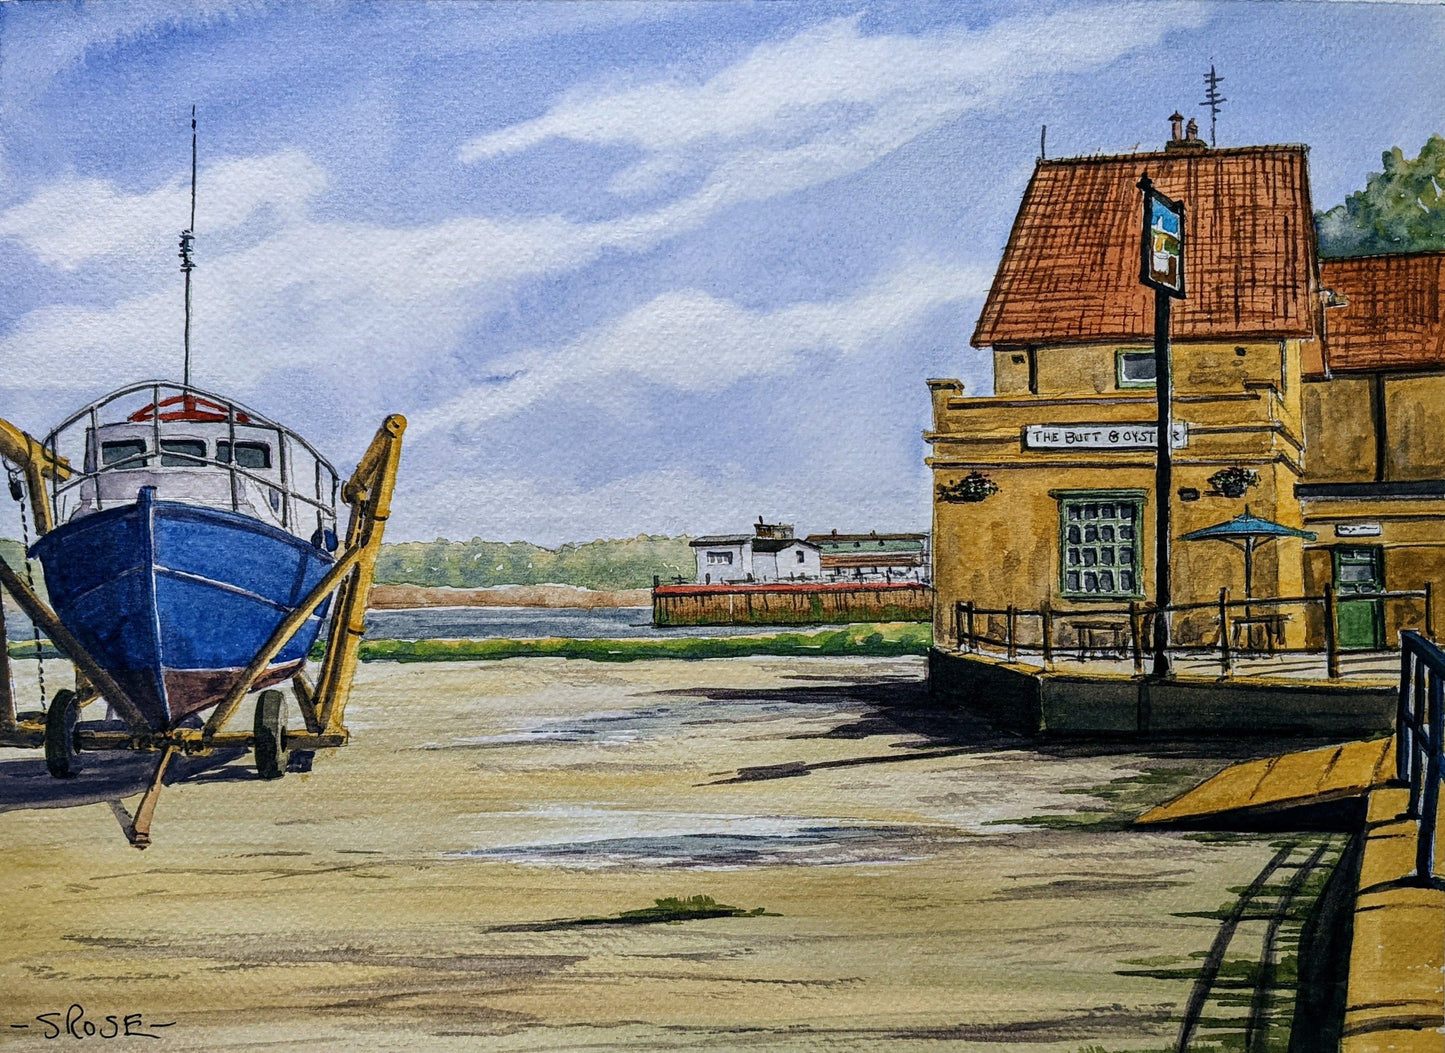 The Butt and Oyster, Pinmill, UK (watercolor painting)